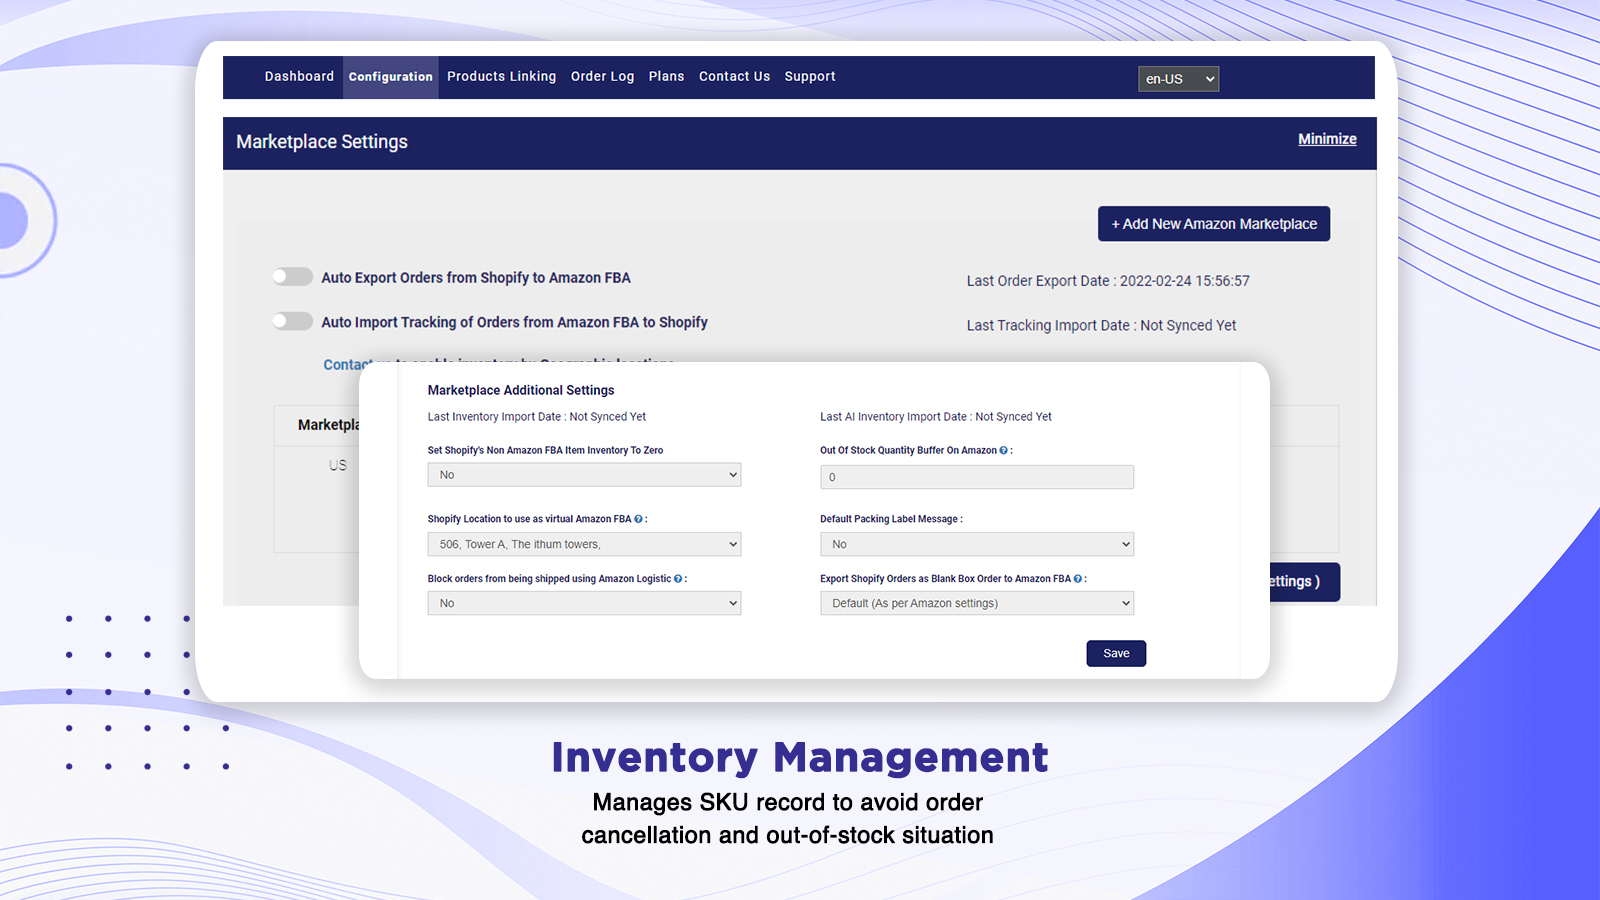 Reduce stockouts, improve inventory levels, and effectively manage stock.